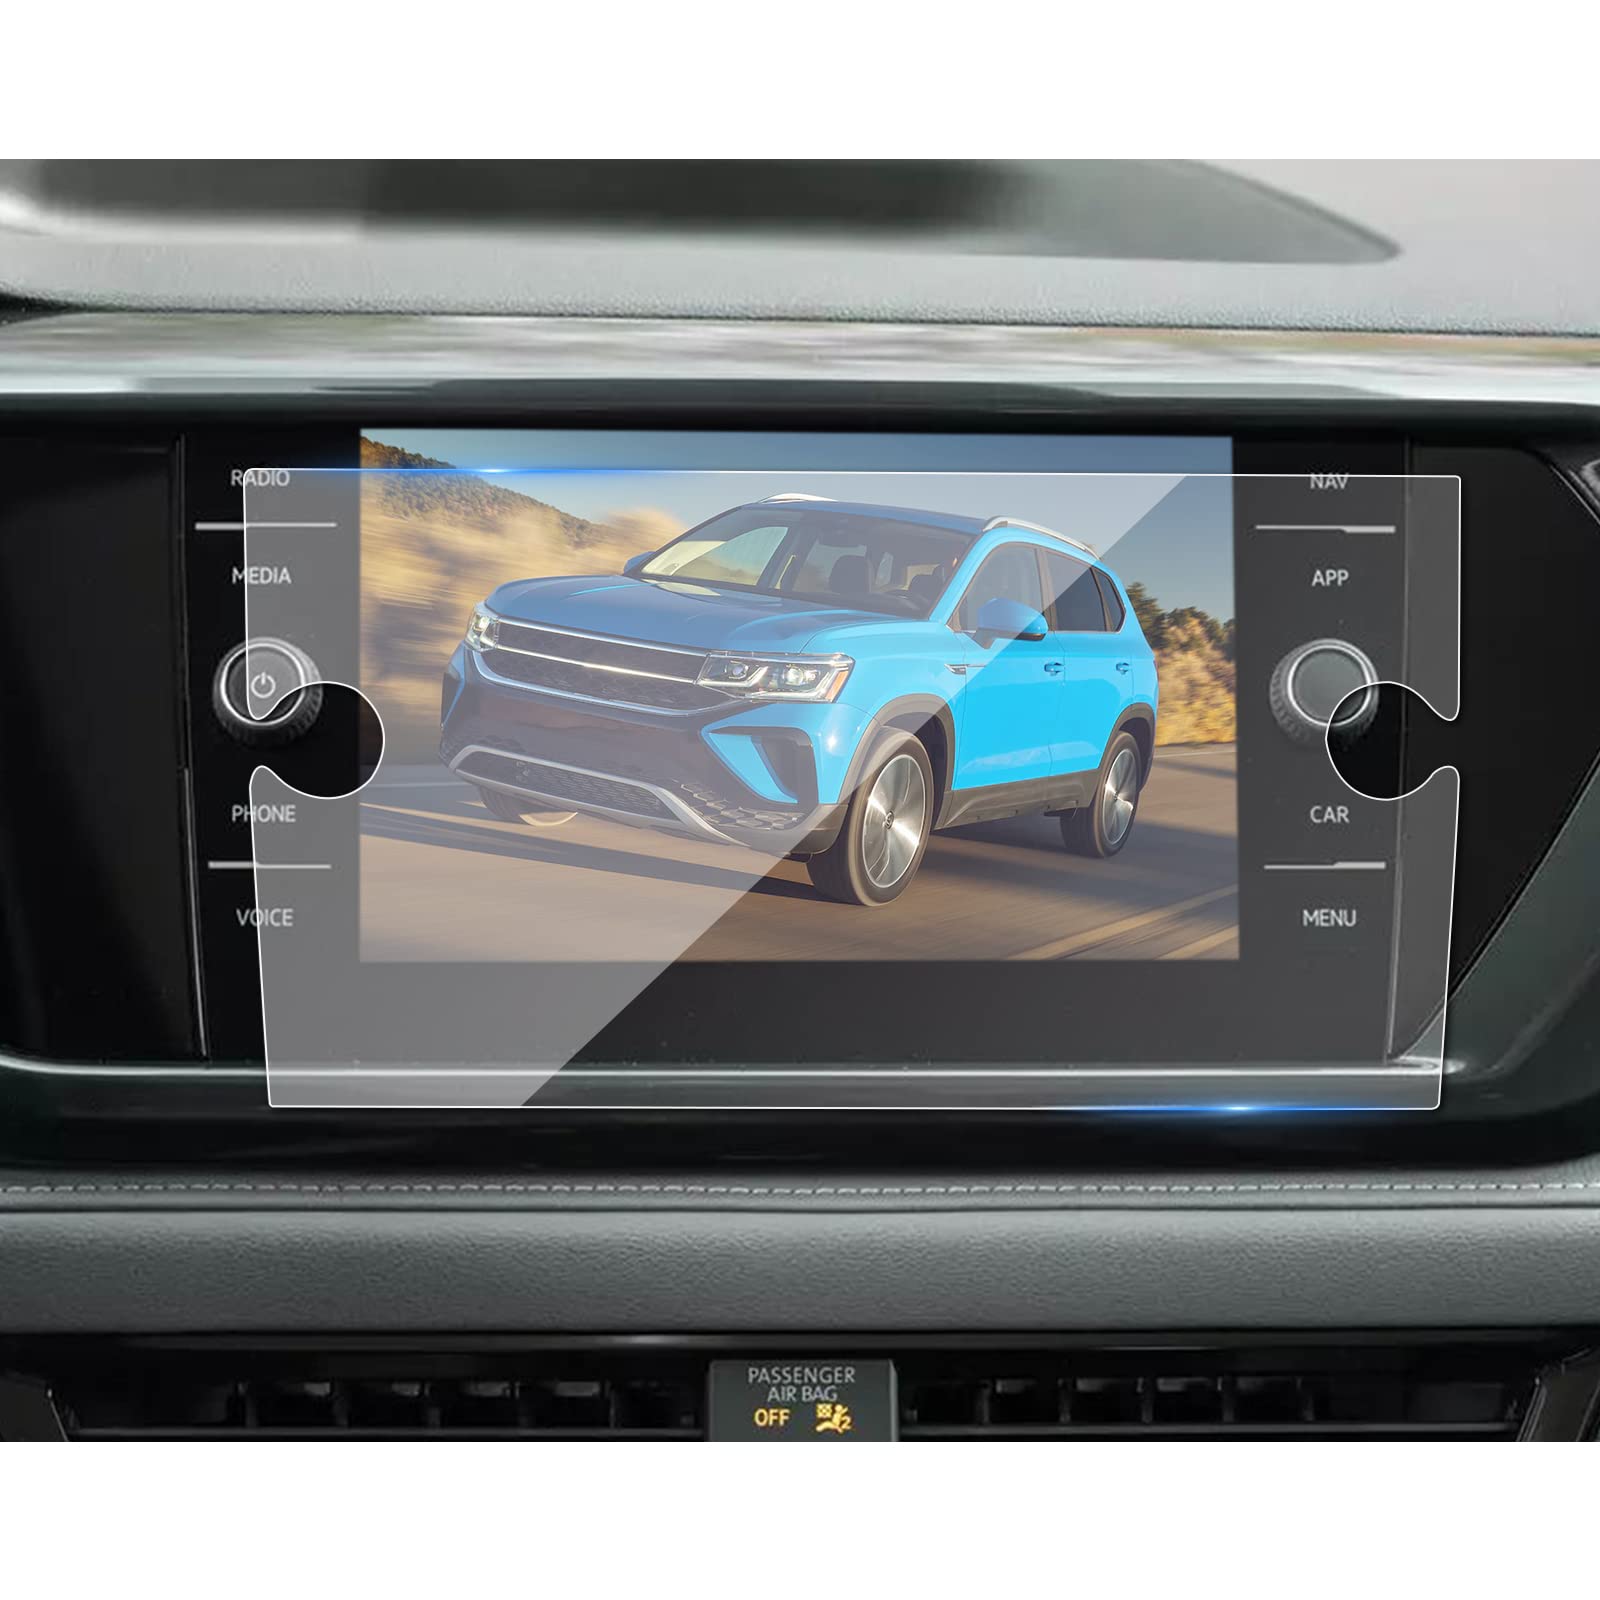 BIBIBO [Upgraded] for 2023 VW Taos Screen Protector for 2022 2023 VW Taos Radio Screen Protector 2023 Taos 8 inch Navigation Display Protective Film,VW Taos 2023 Screen Protector 2023 VW Taos Accessories HD 9H Scratch Resistant